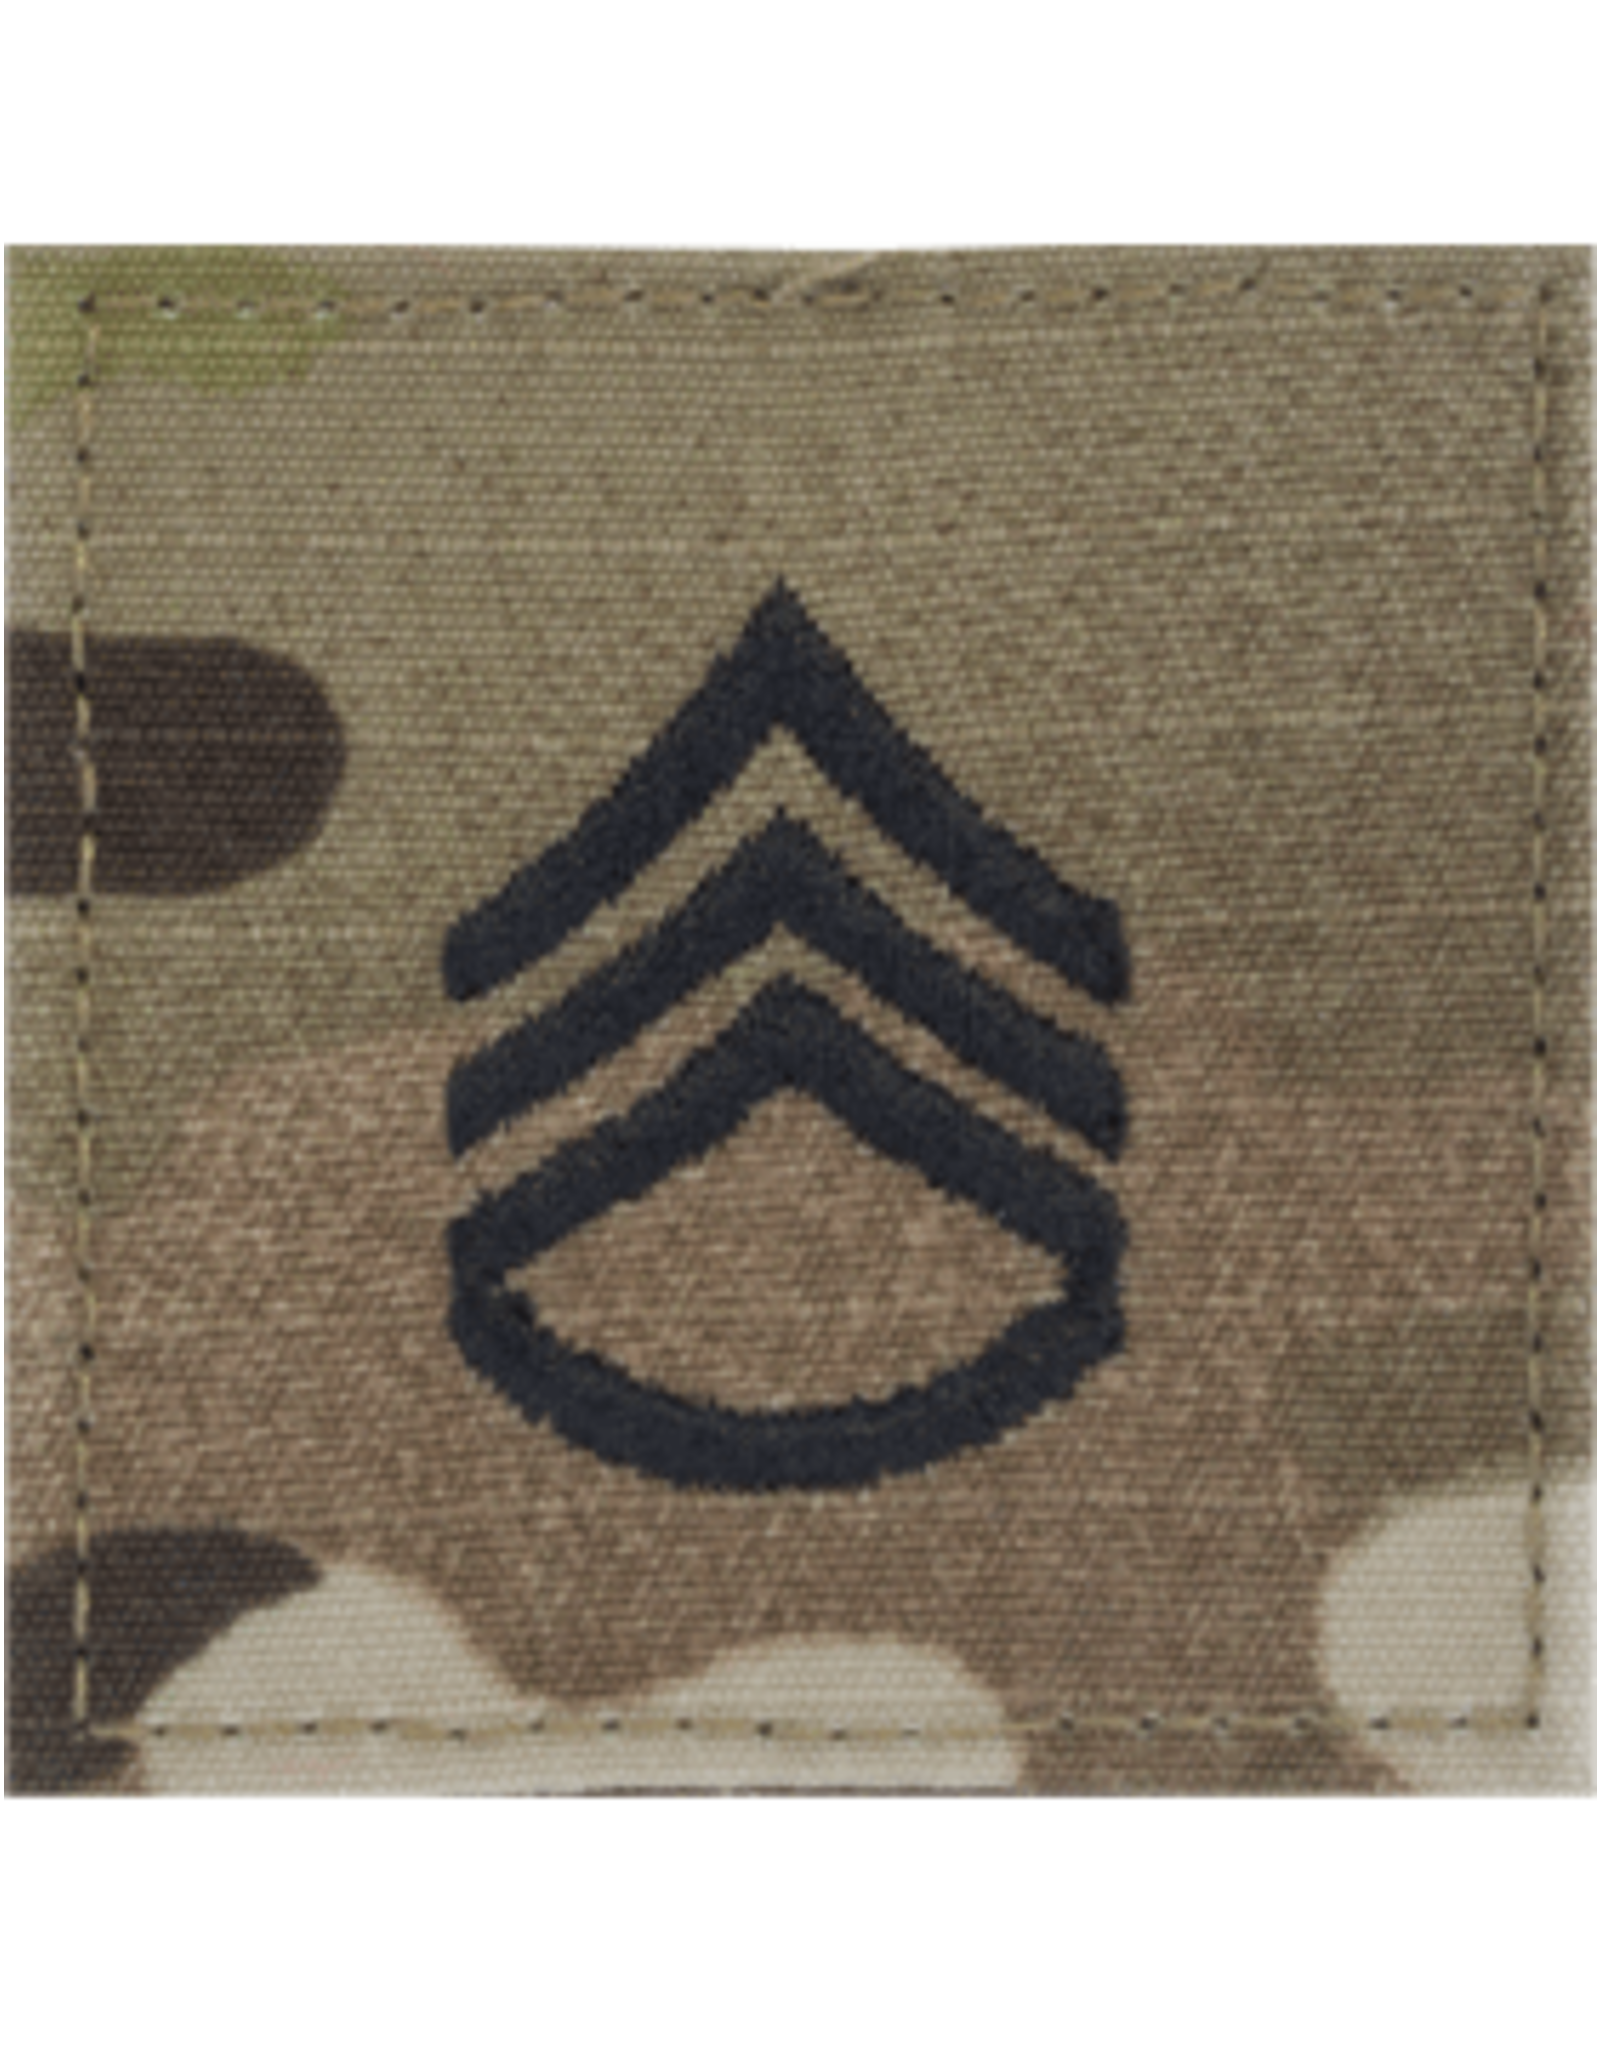 Embroidered Rank W/ Hook - SSG / E6 Staff Sargeant Scorpion